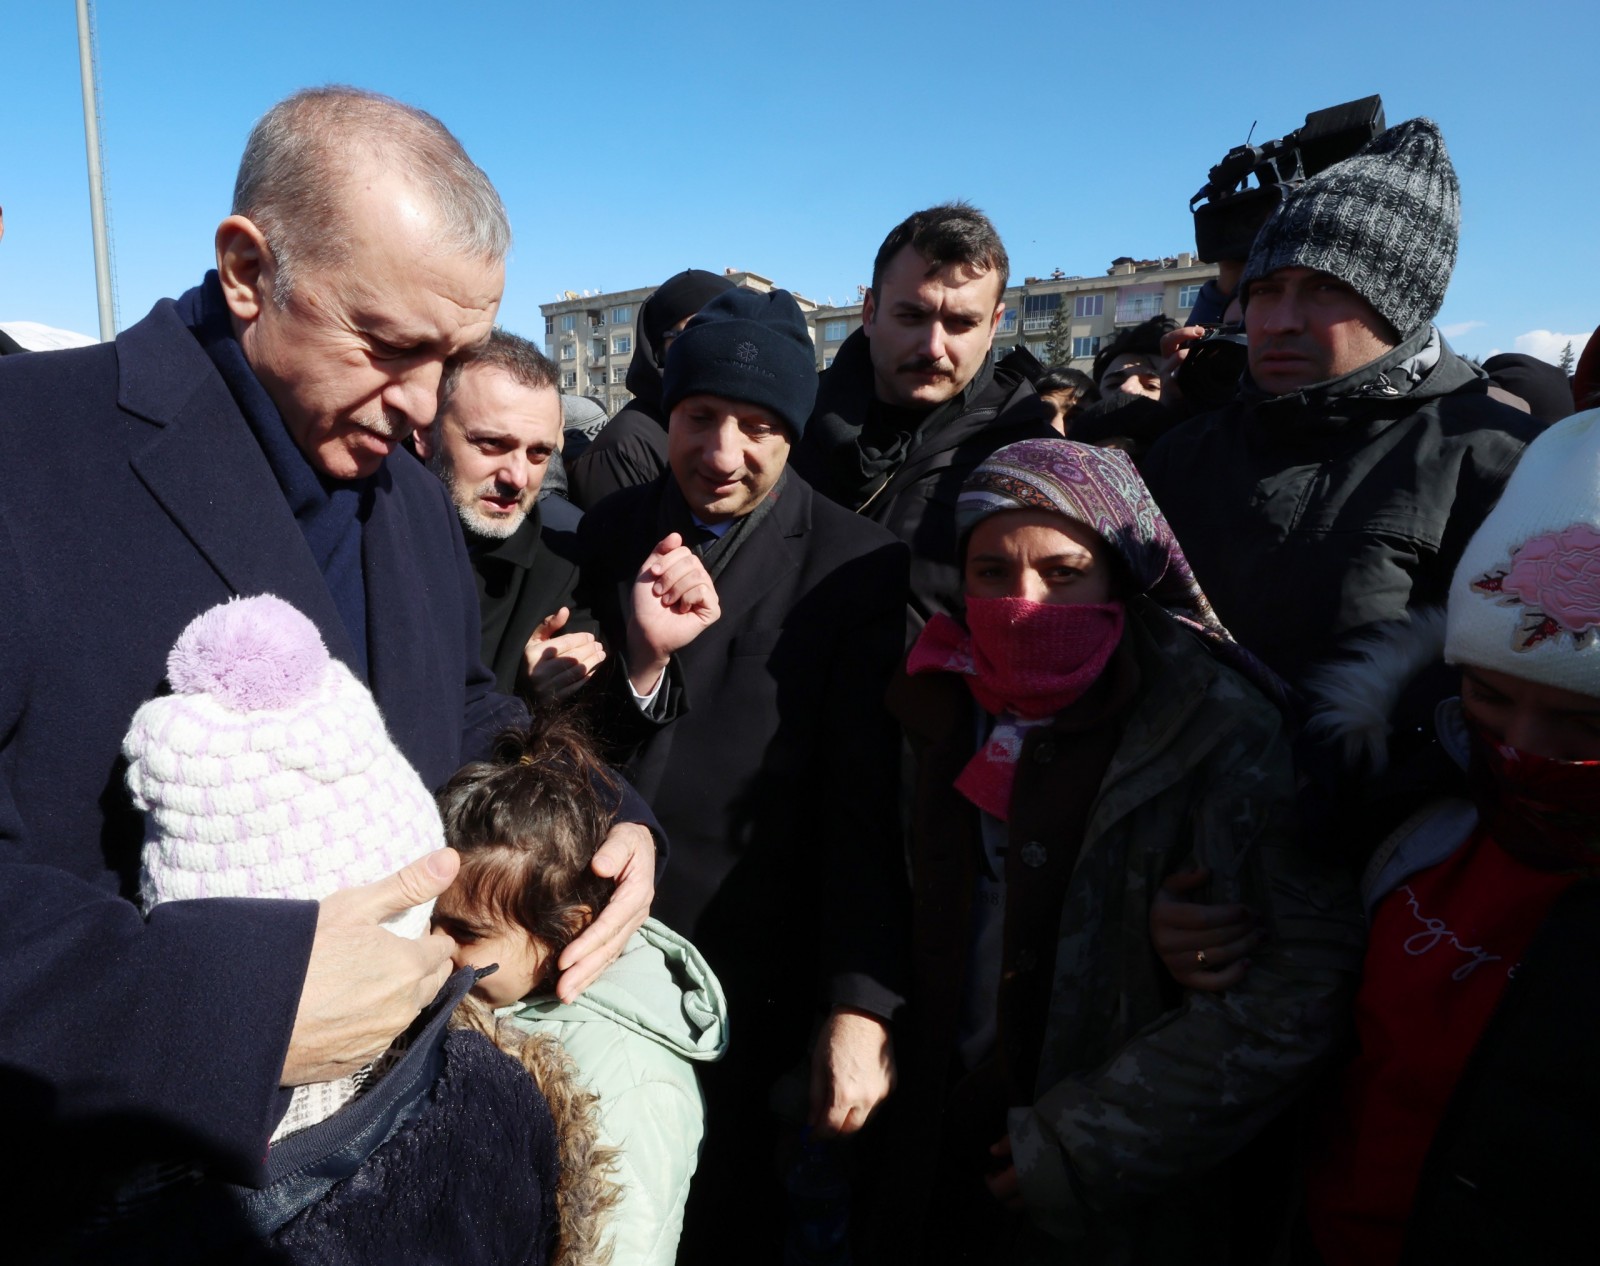 epa10454458 A handout photo made available by Turkey’s Presidential press office shows Turkish President Recep Tayyip Erdogan (L) greeting people as he visits a tent camp in the aftermath of a major earthquake in Kahramanmaras, Turkey, 08 February 2023. More than 11,000 people have died and thousands more injured after two major earthquakes struck southern Turkey and northern Syria on 06 February. Authorities fear the death toll will keep climbing as rescuers look for survivors across the region.  EPA/MURAT CETINMUHURDAR/TURKISH PRESIDENTIAL PRESS OFFICE/HANDOUT  HANDOUT EDITORIAL USE ONLY/NO SALES